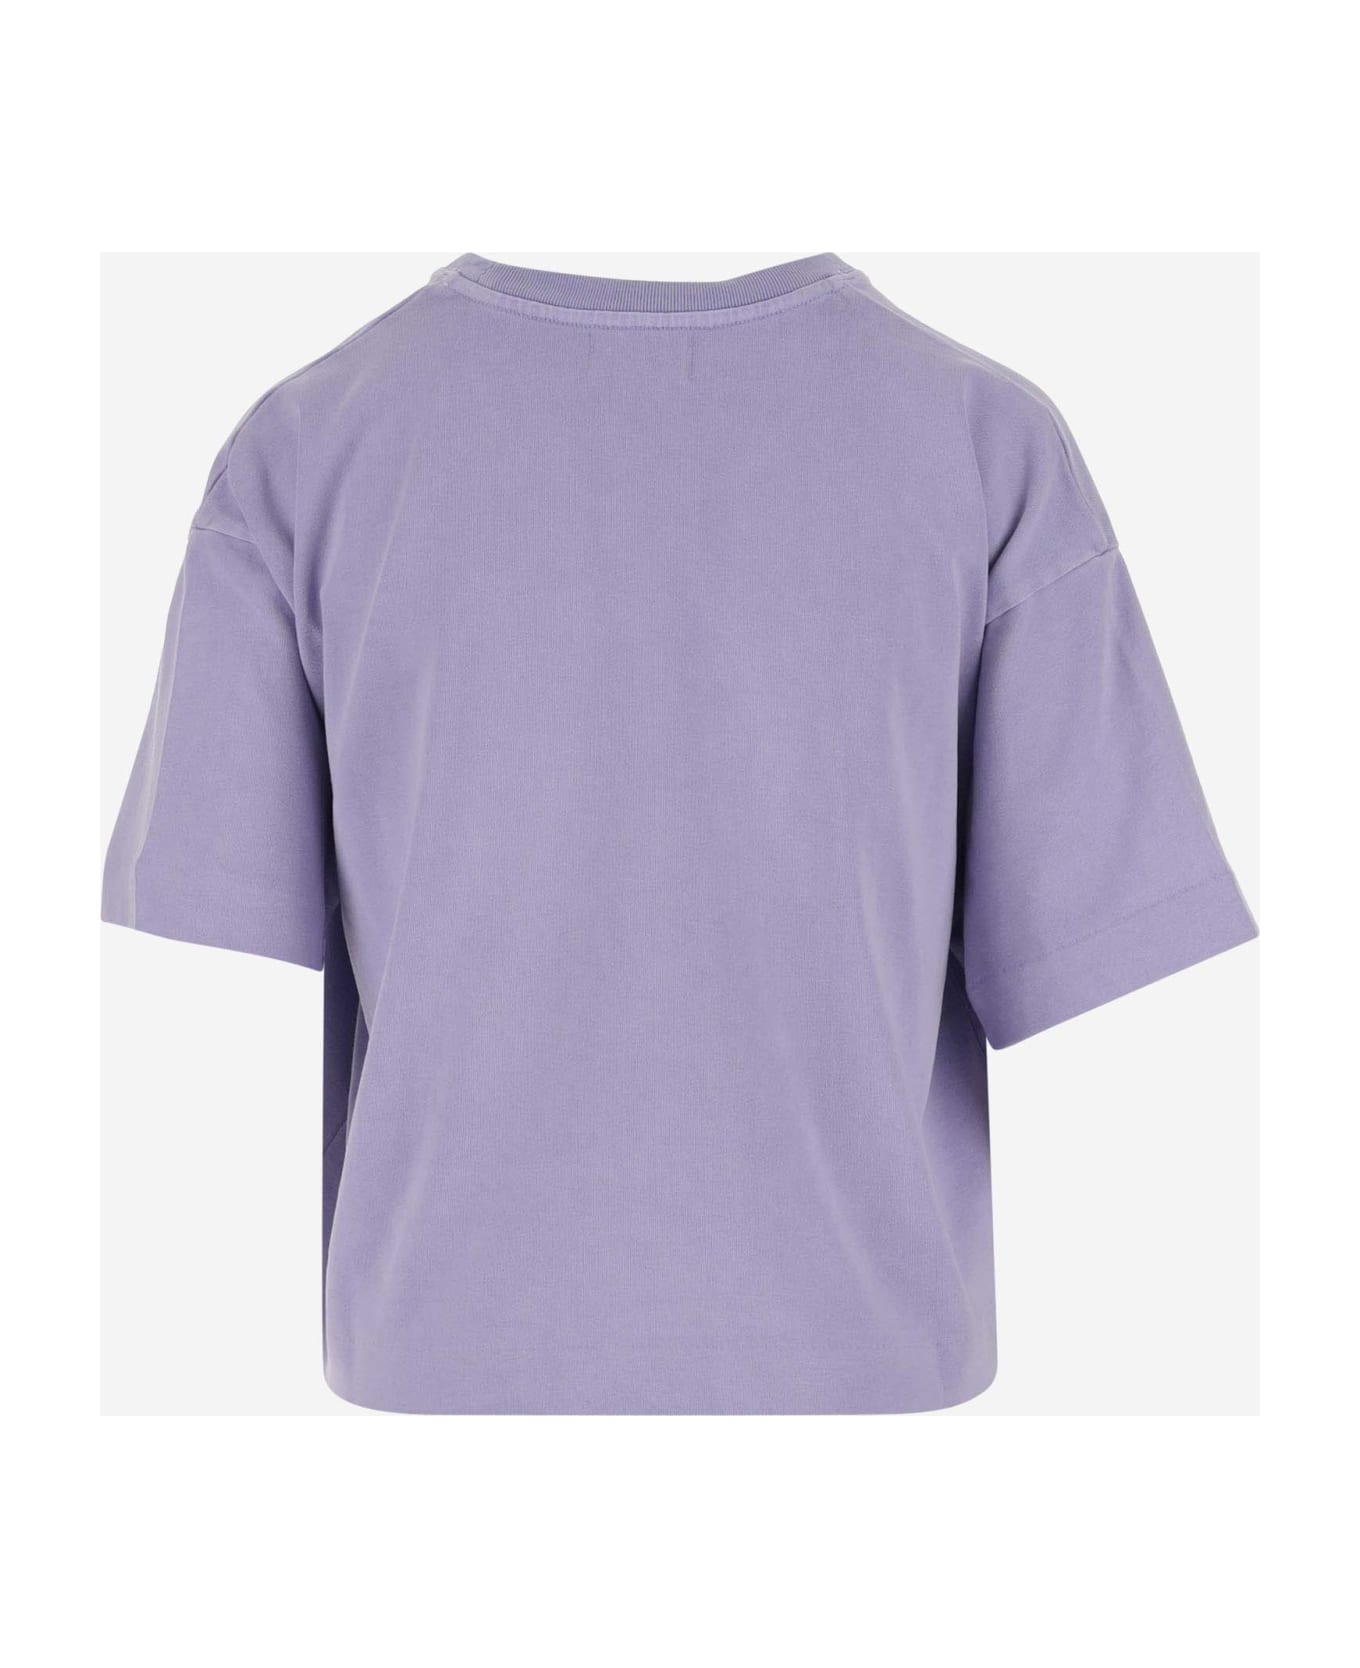 Autry Cotton T-shirt With Logo - PASTEL LILAC